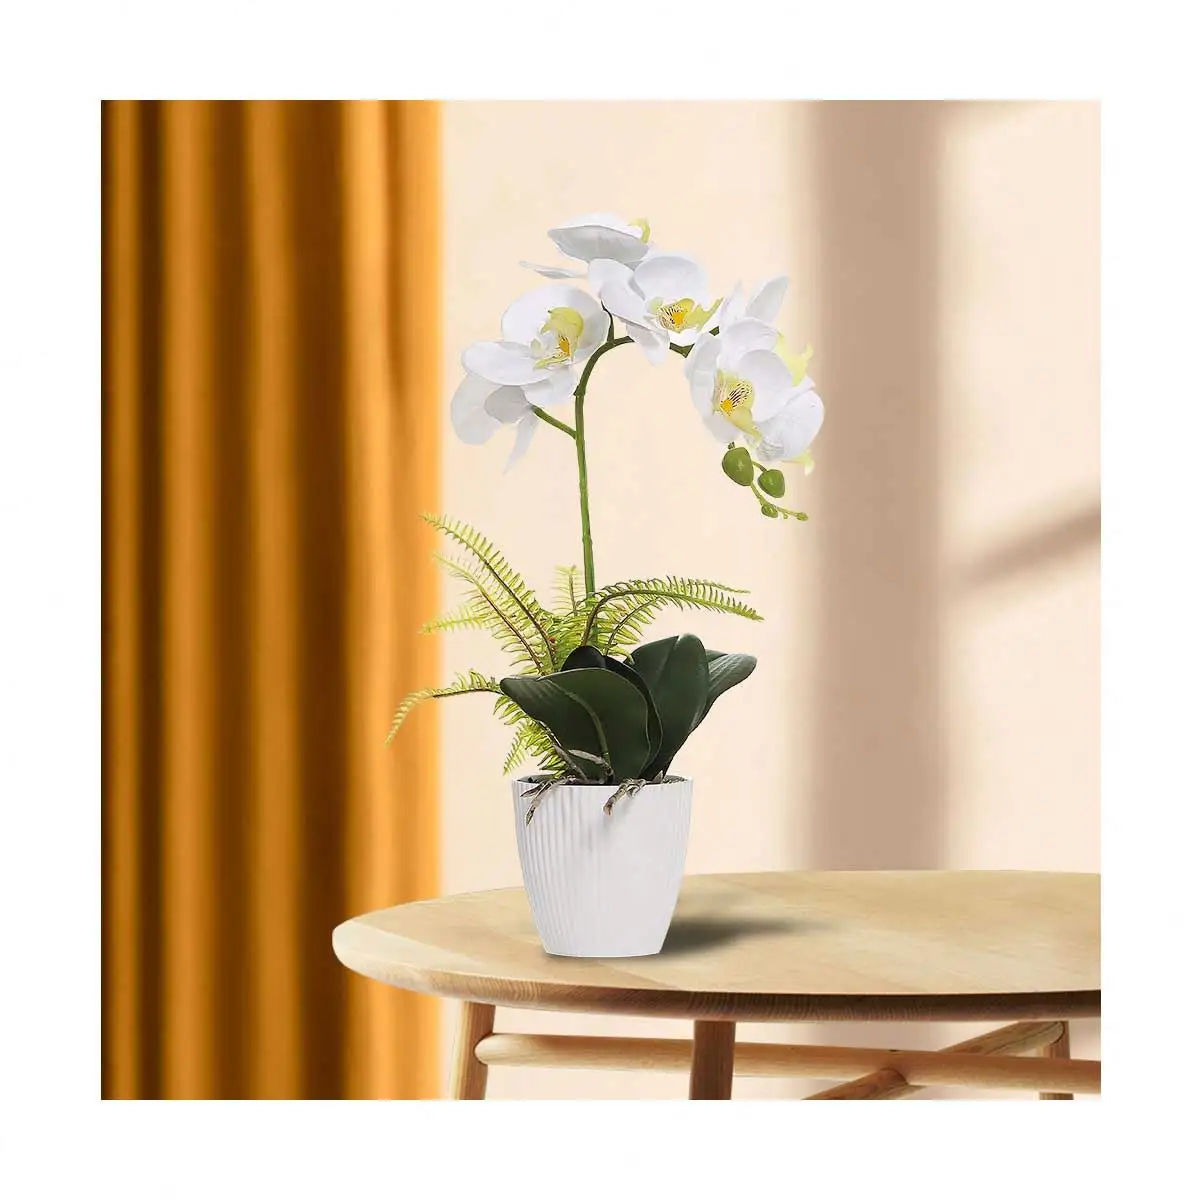 Wholesale high quality fakeorchid flower artificial silk flowers